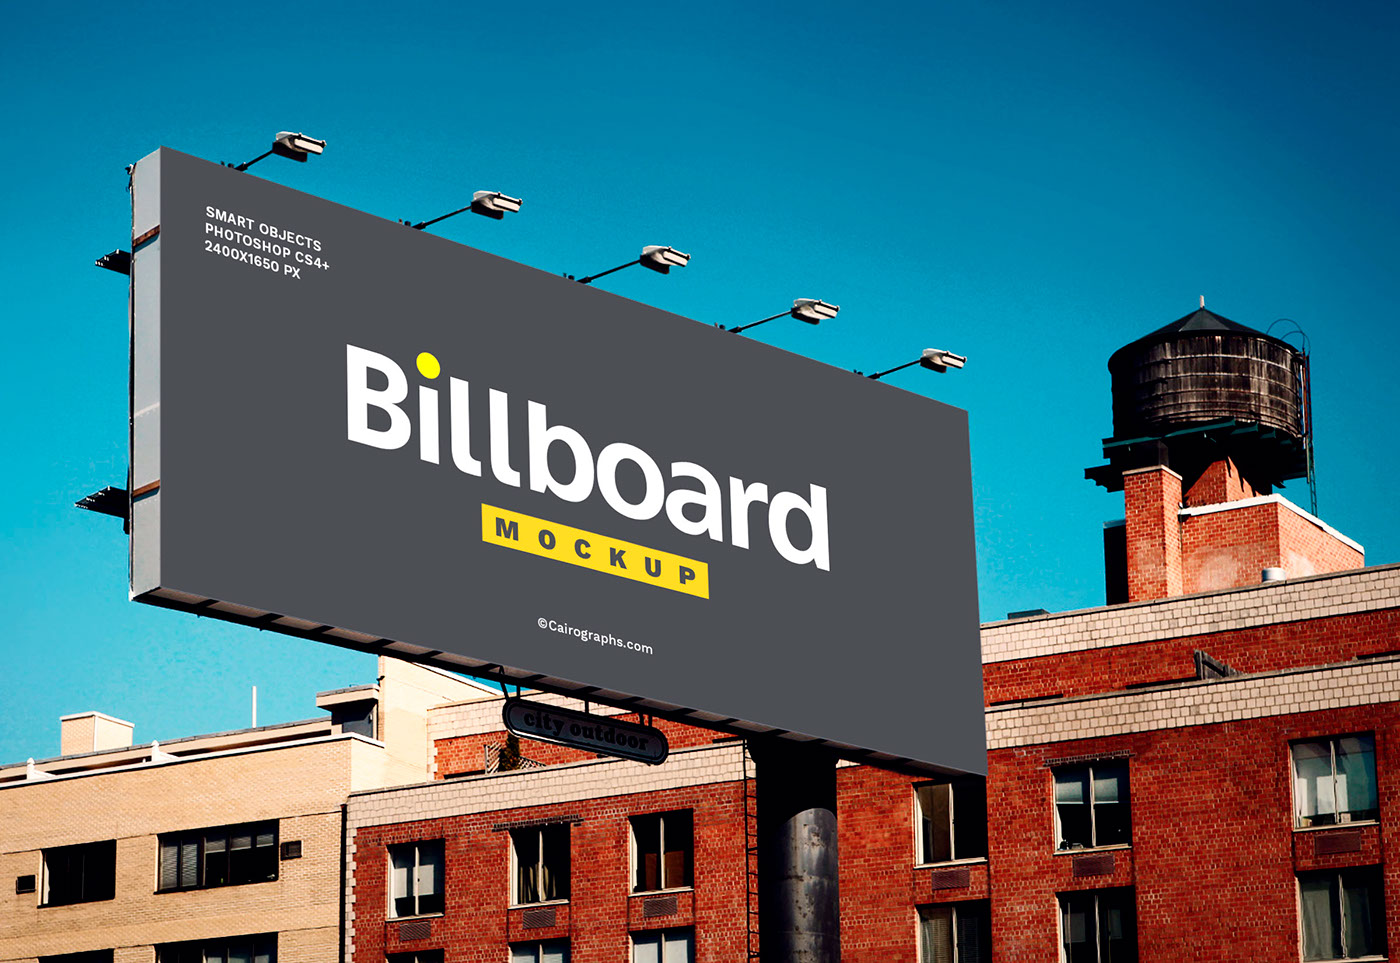 ads advertisement Mockup banner billboard business campaign company Display editable Outdoor photorealistic